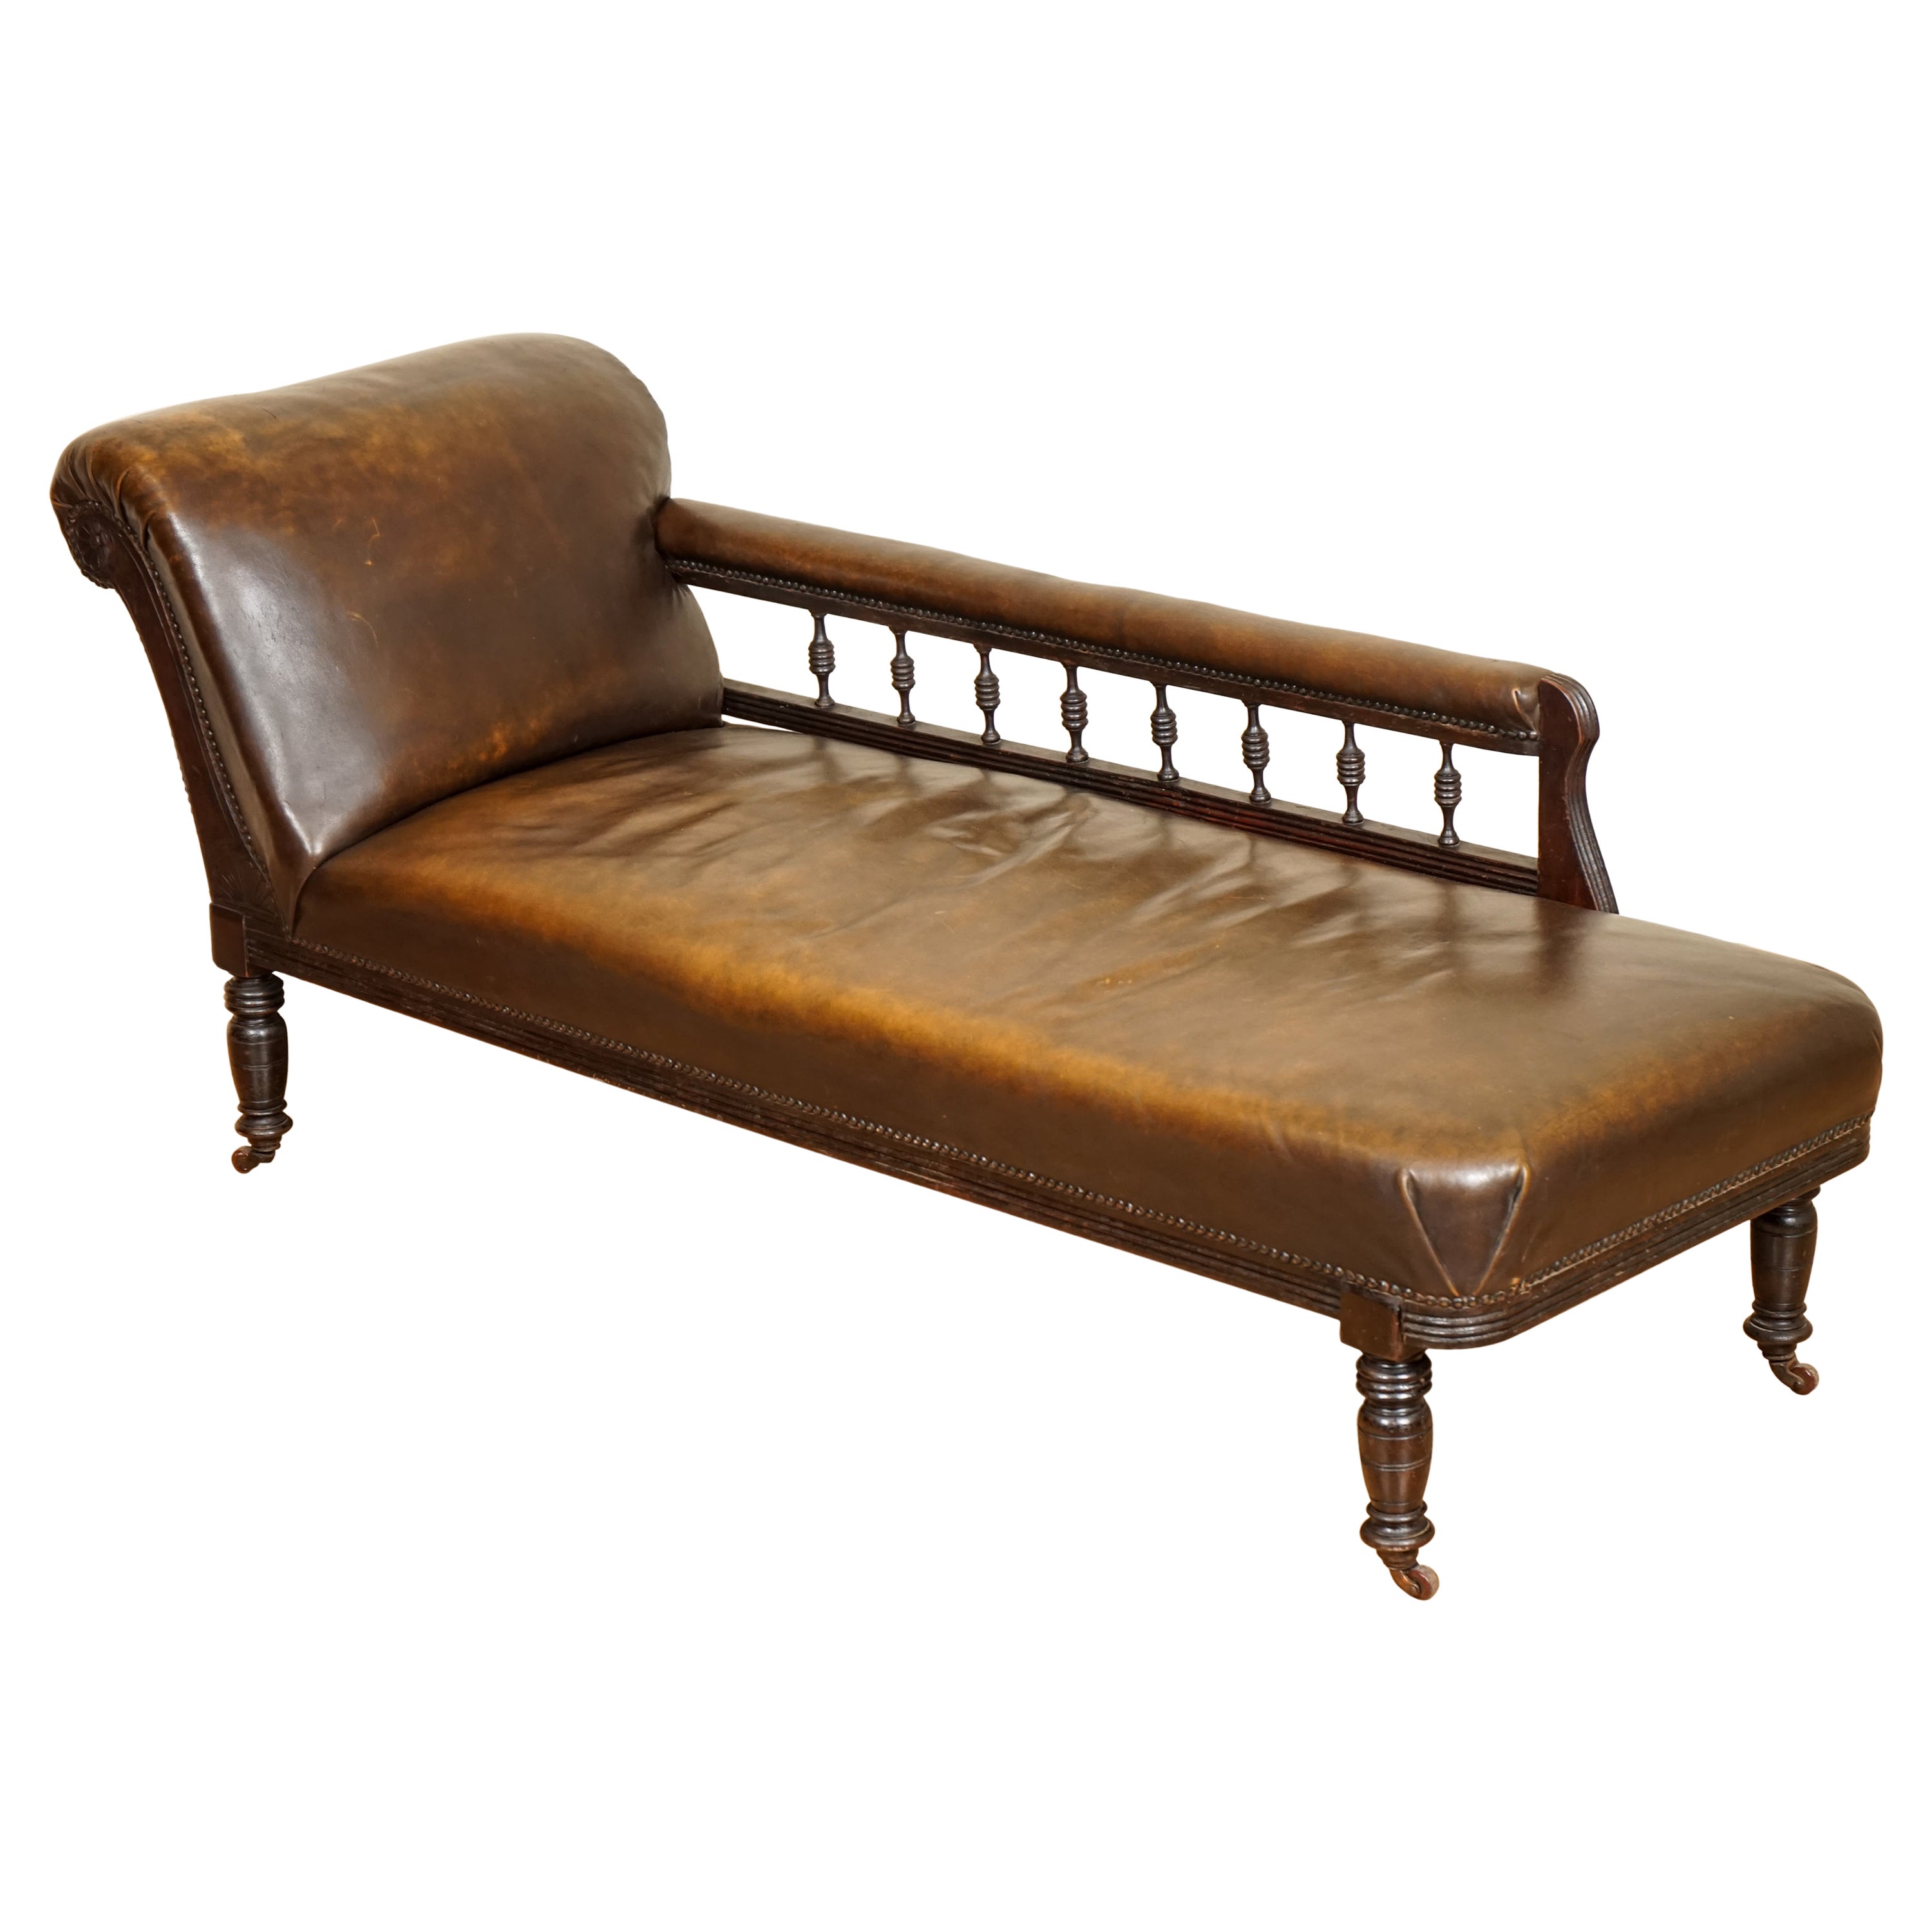 Antique Early Victorian Carved Leather Chaise Lounge Day Bed Regency